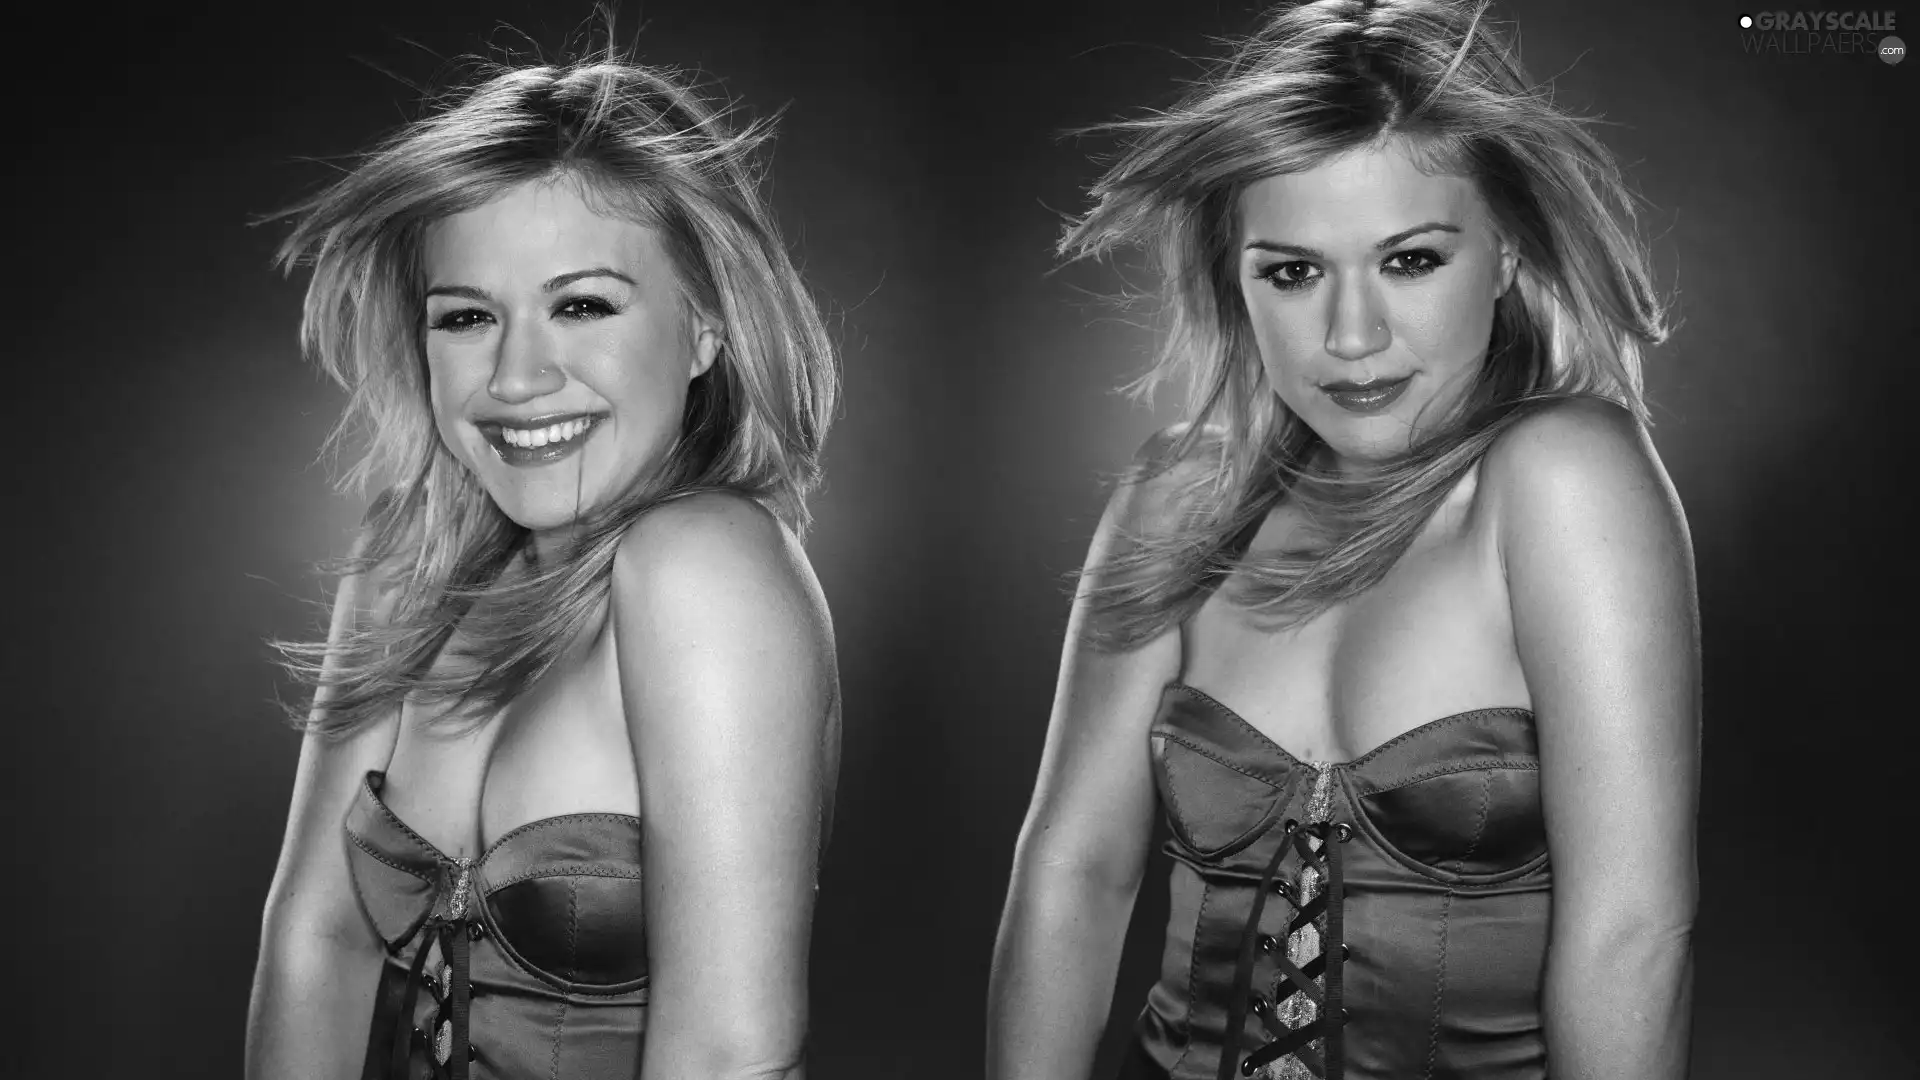 songster, Kelly Clarkson